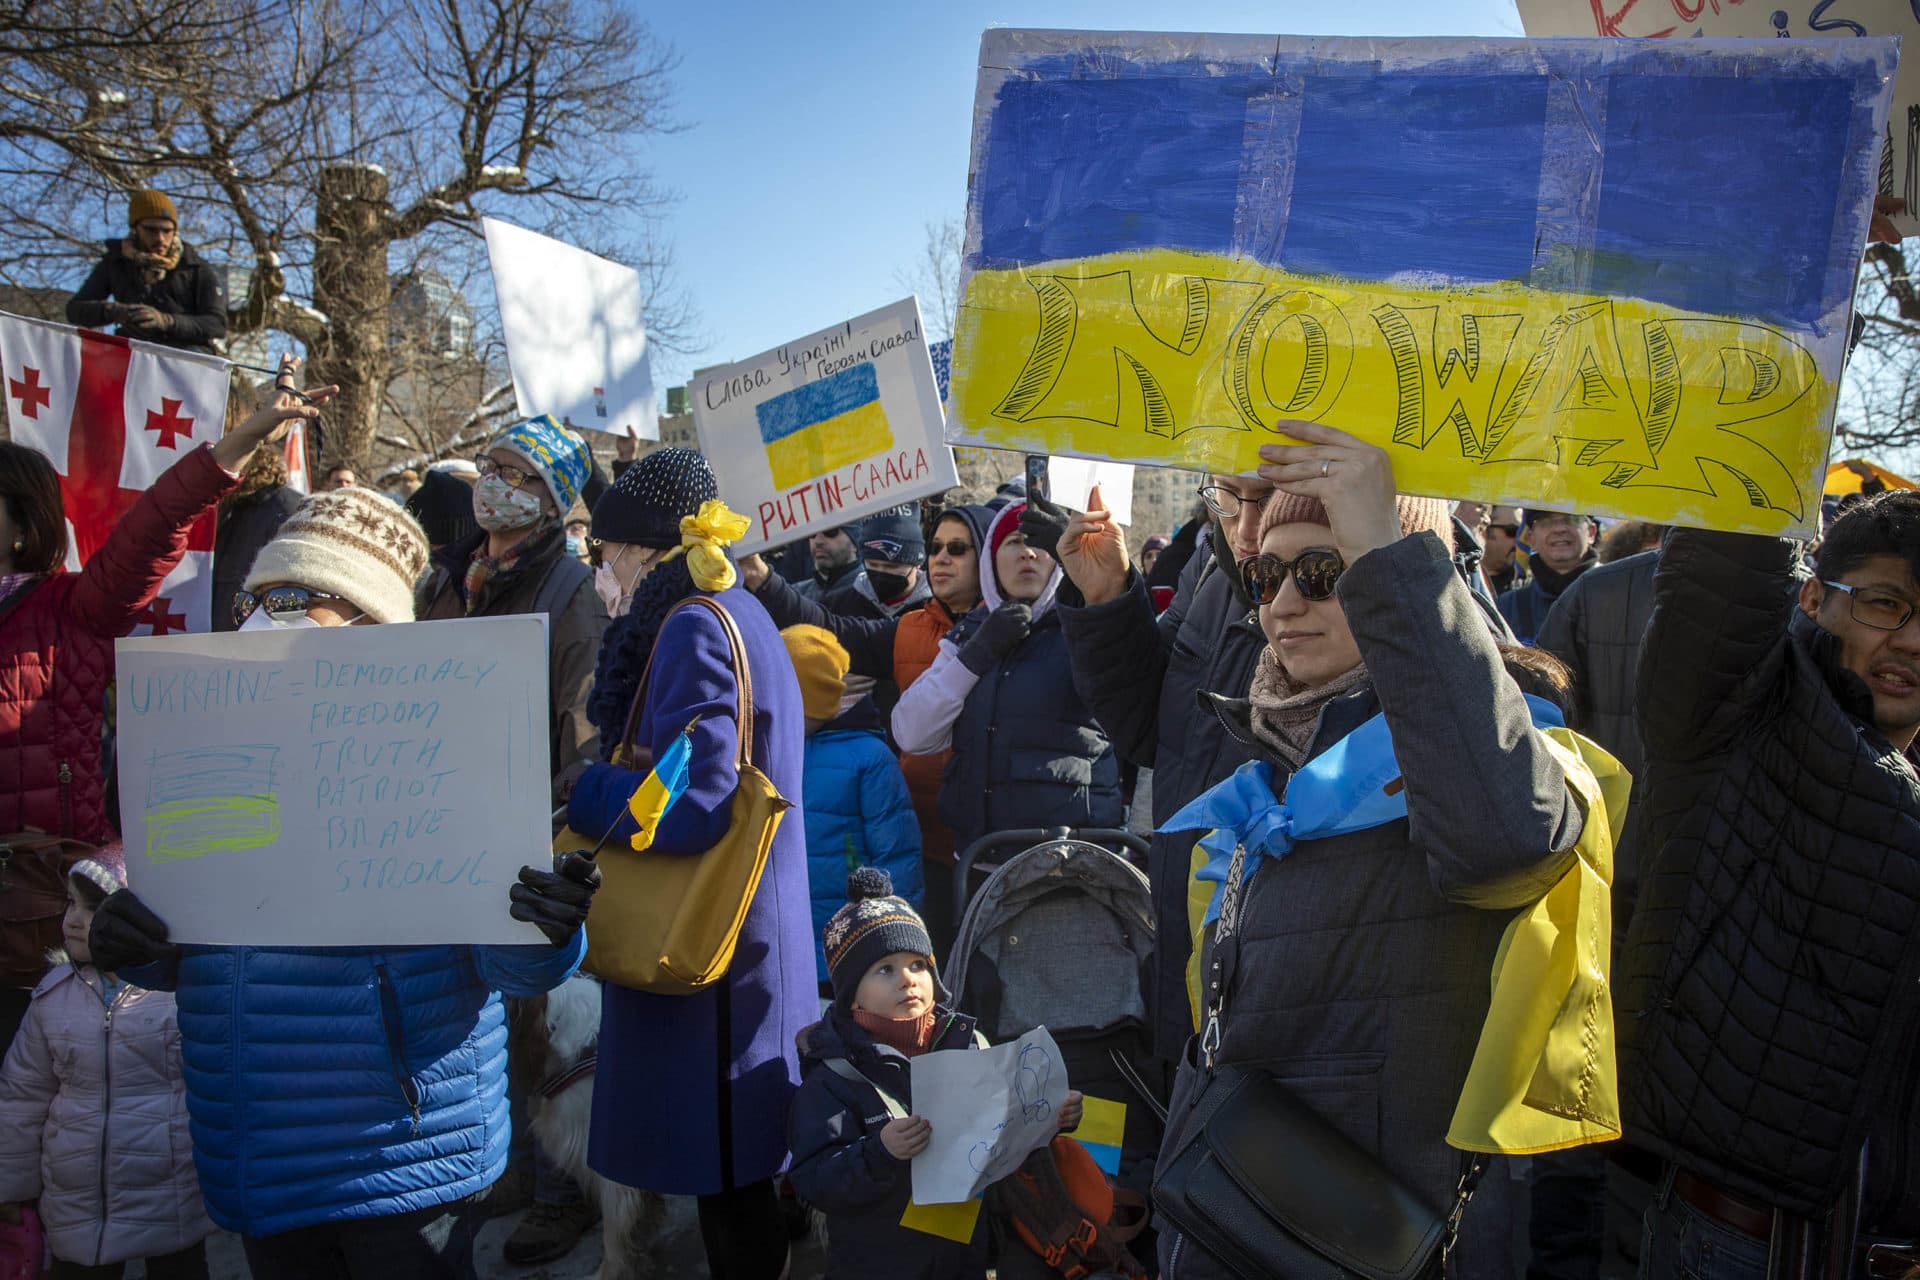 Outside the Mass. State House, Anna Khomenko holds up a sign saying "No War" during the demonstration against the war in Ukraine. (Robin Lubbock/WBUR)